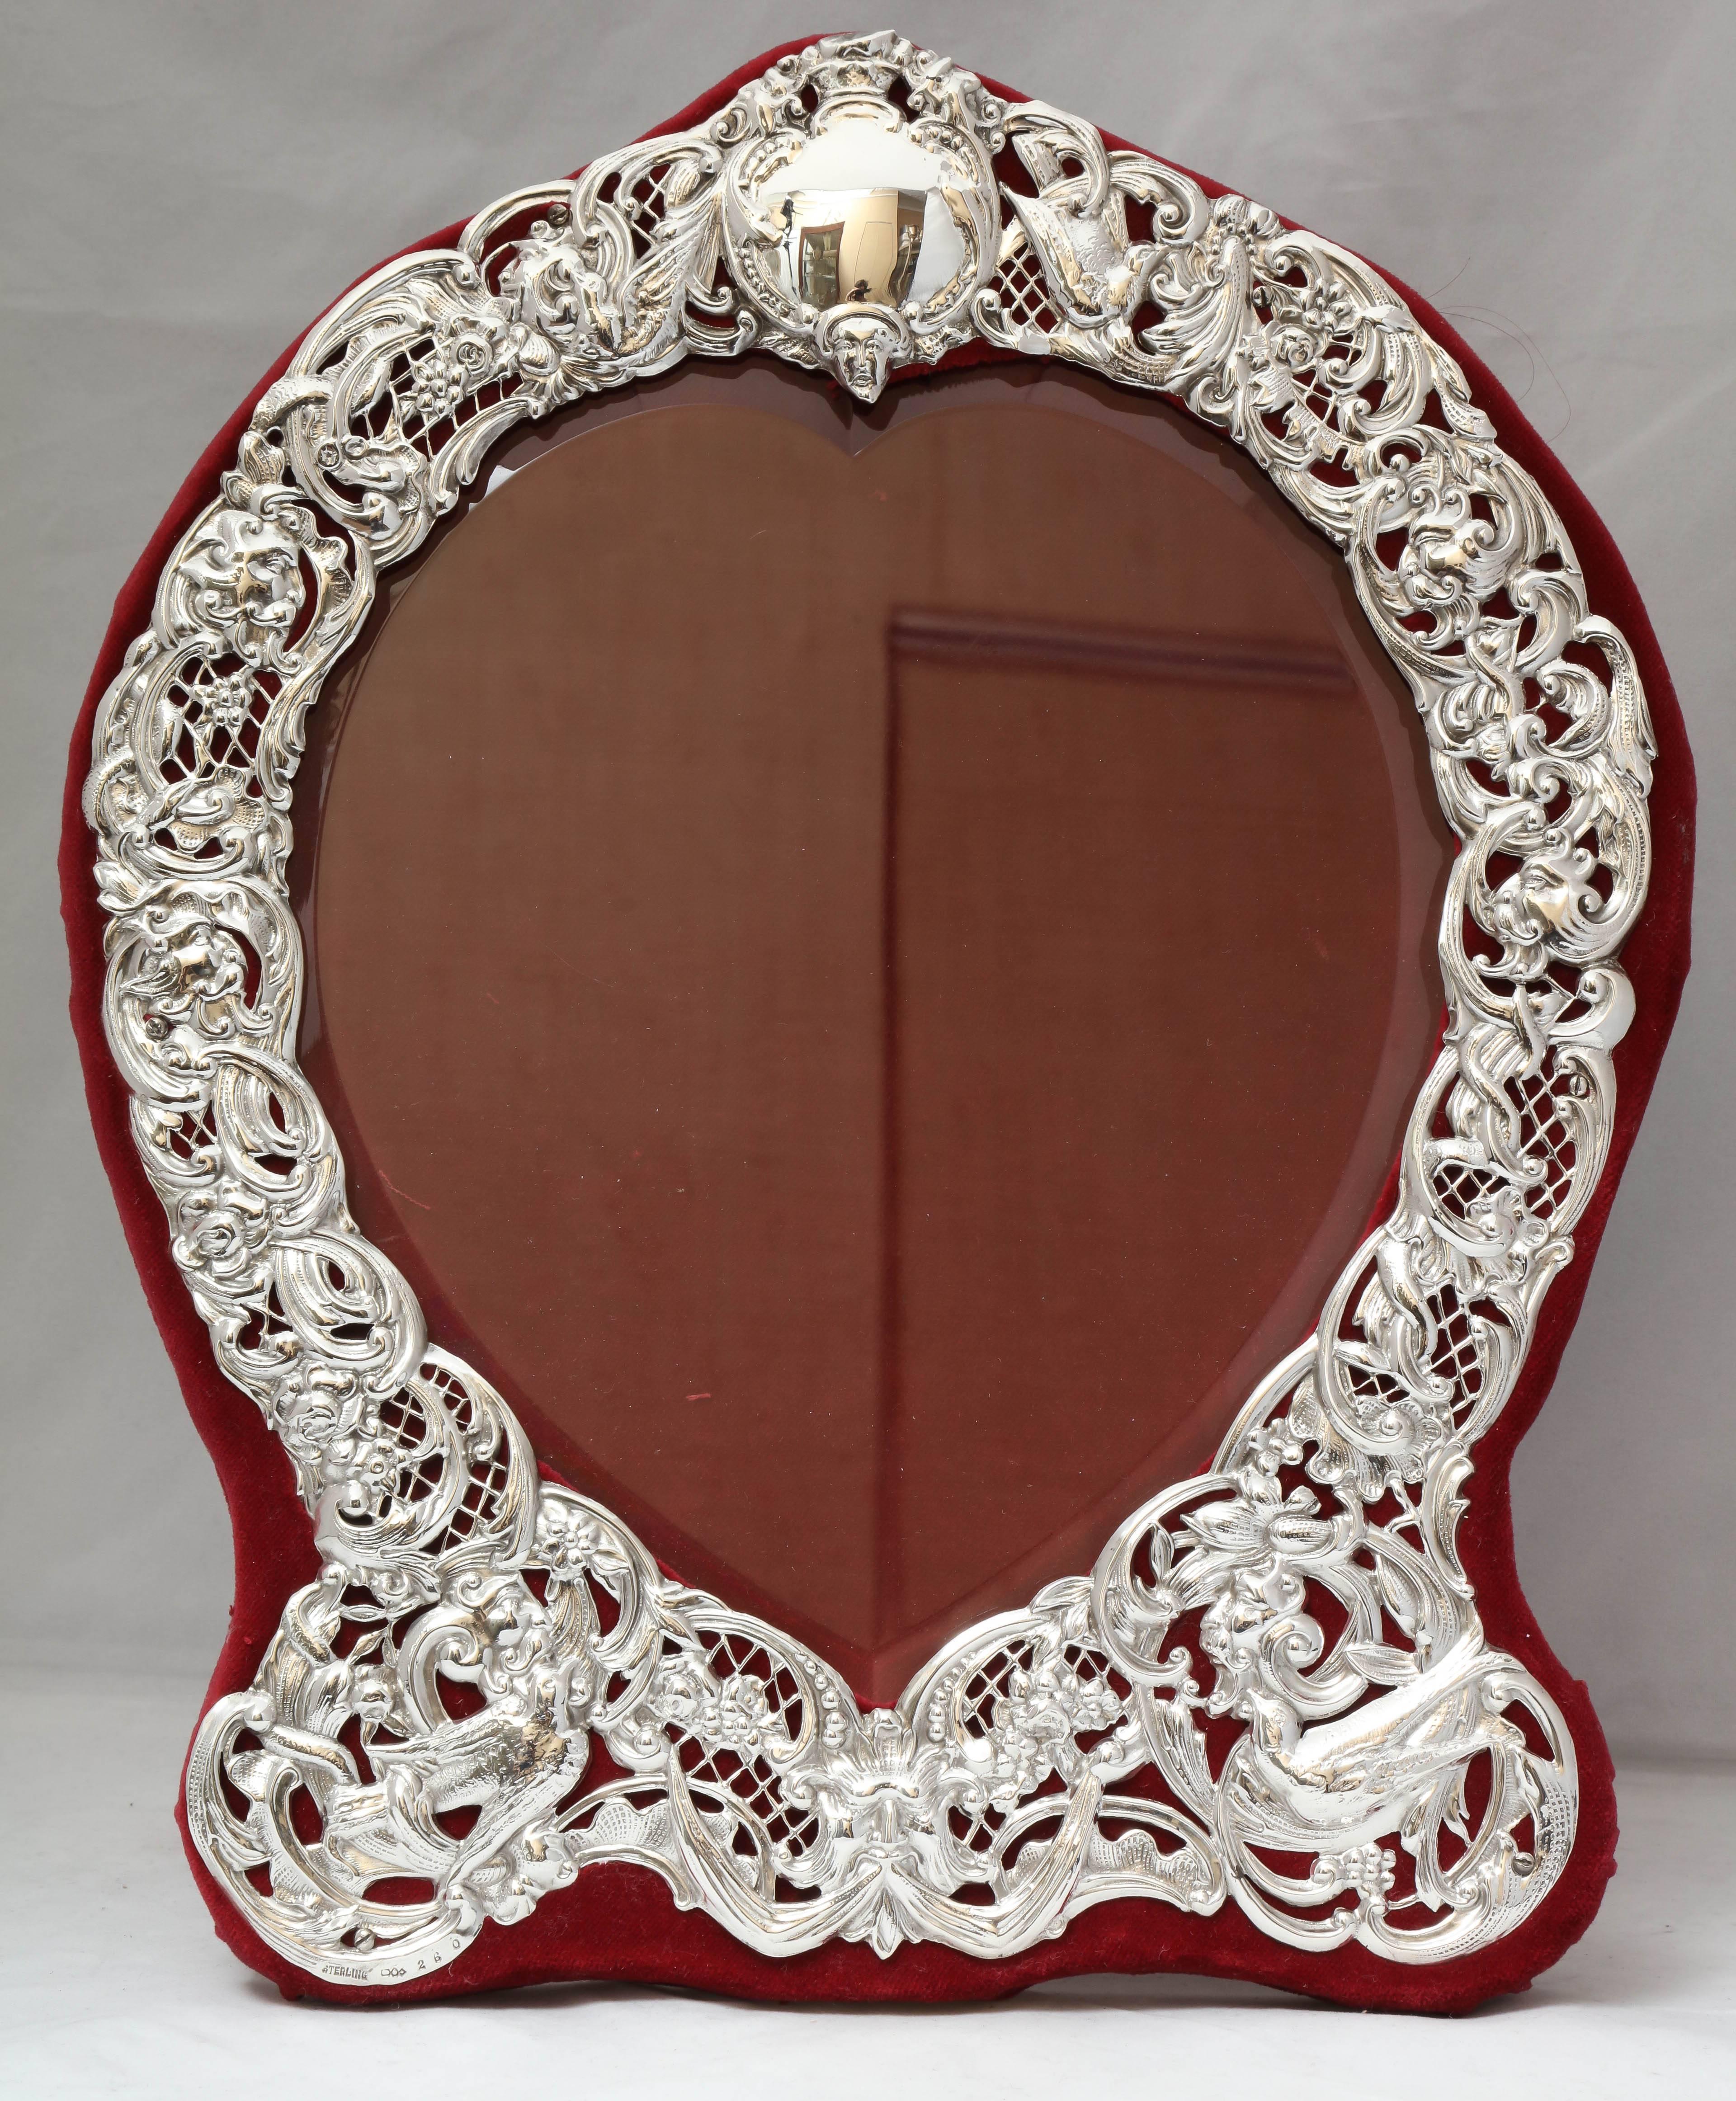 Large, sterling silver, heart-form picture frame, Dominick & Haff, New York, circa 1895. Pierced work allows velvet to show through the design. Edges of heart-shaped glass are beveled. Measures: 14 1/4 inches high x 11 3/4 inches wide (at widest